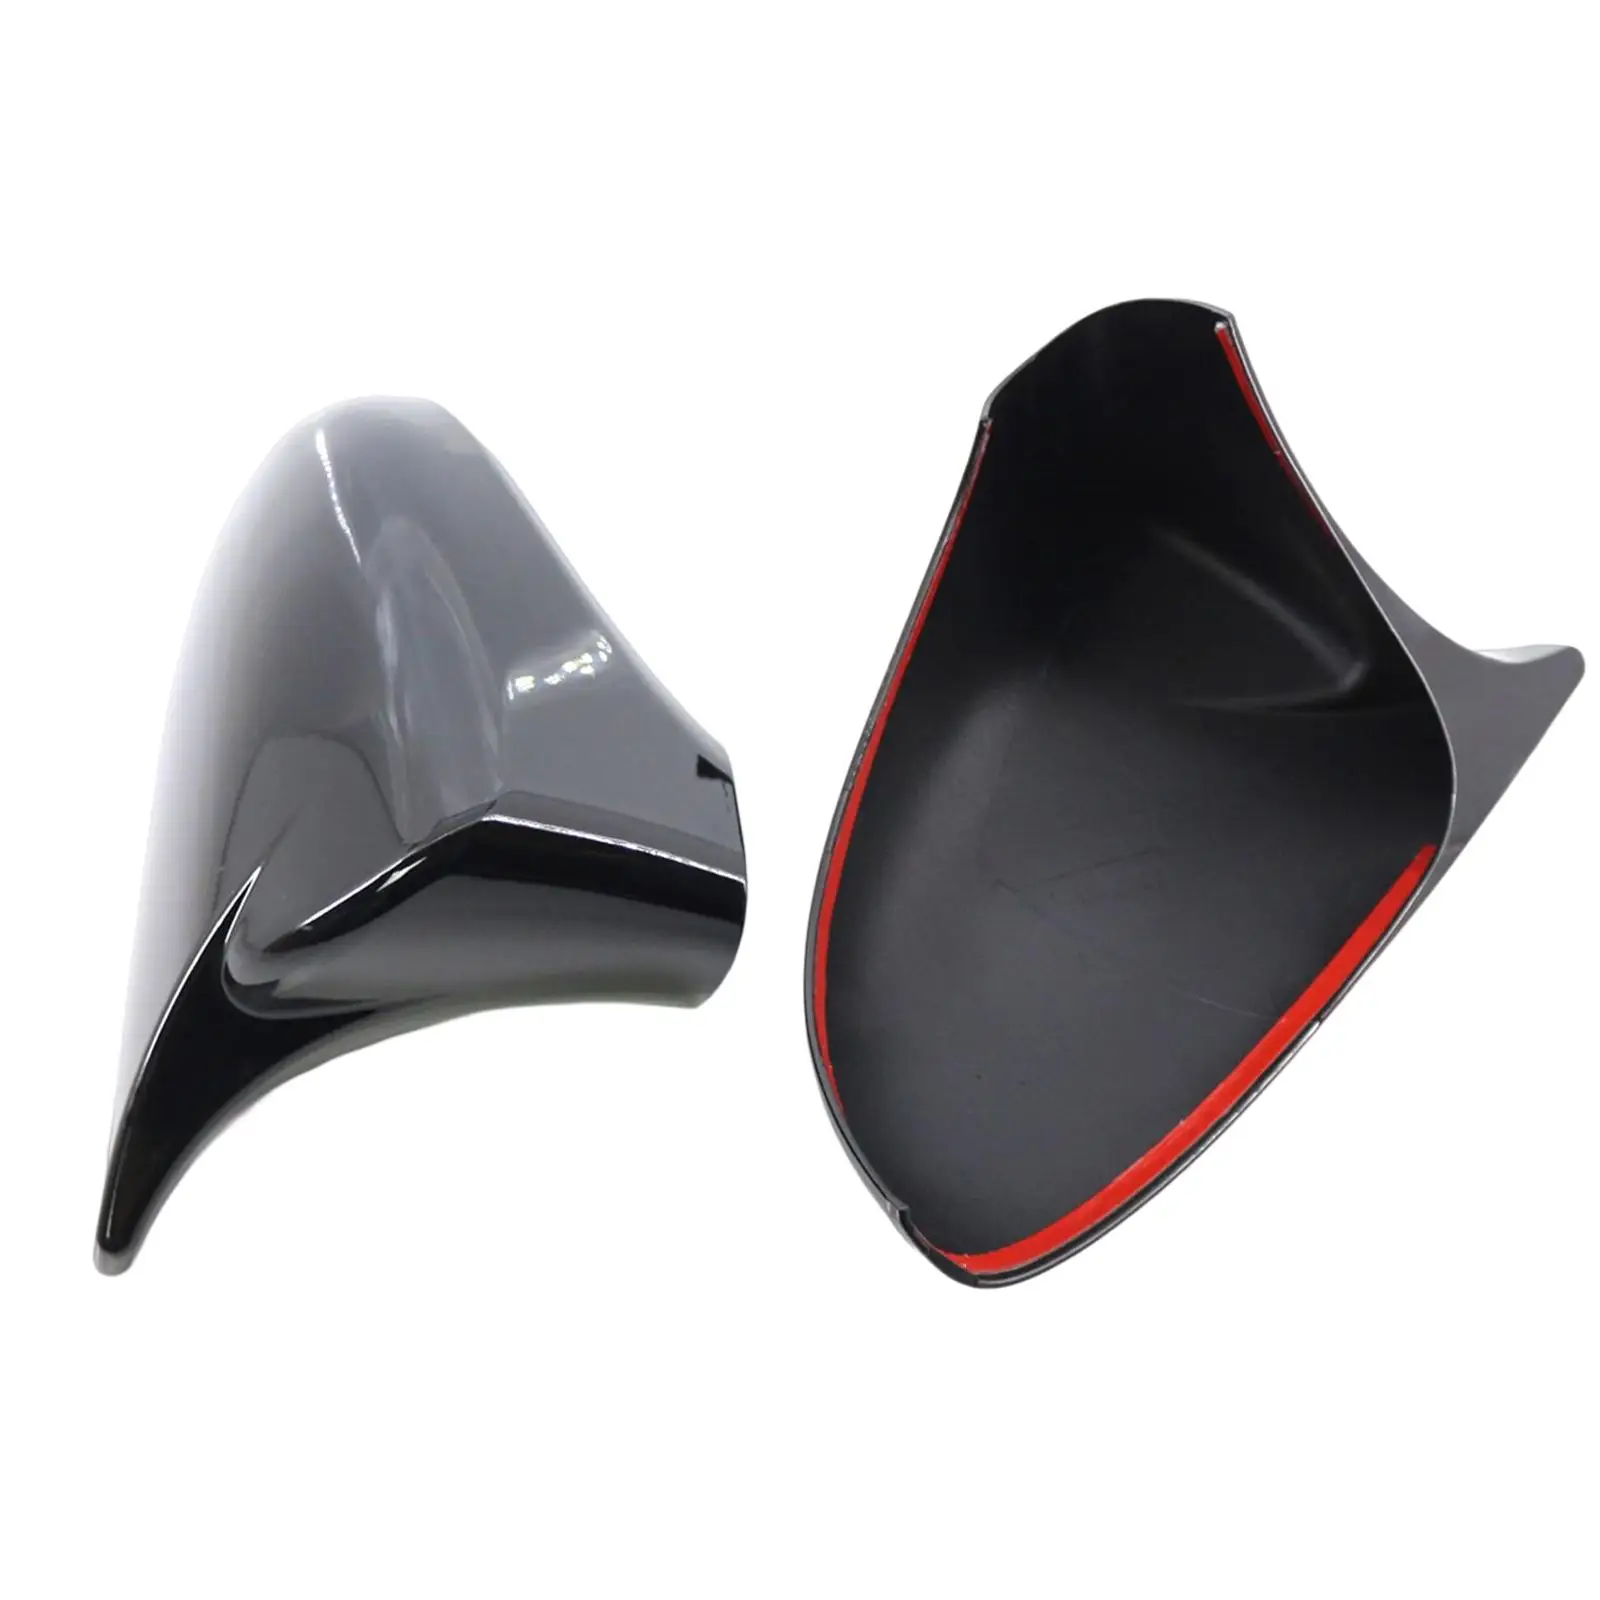 2Pcs Auto Side View Mirror Covers 8794A30E00B1 for GS Gsf ES